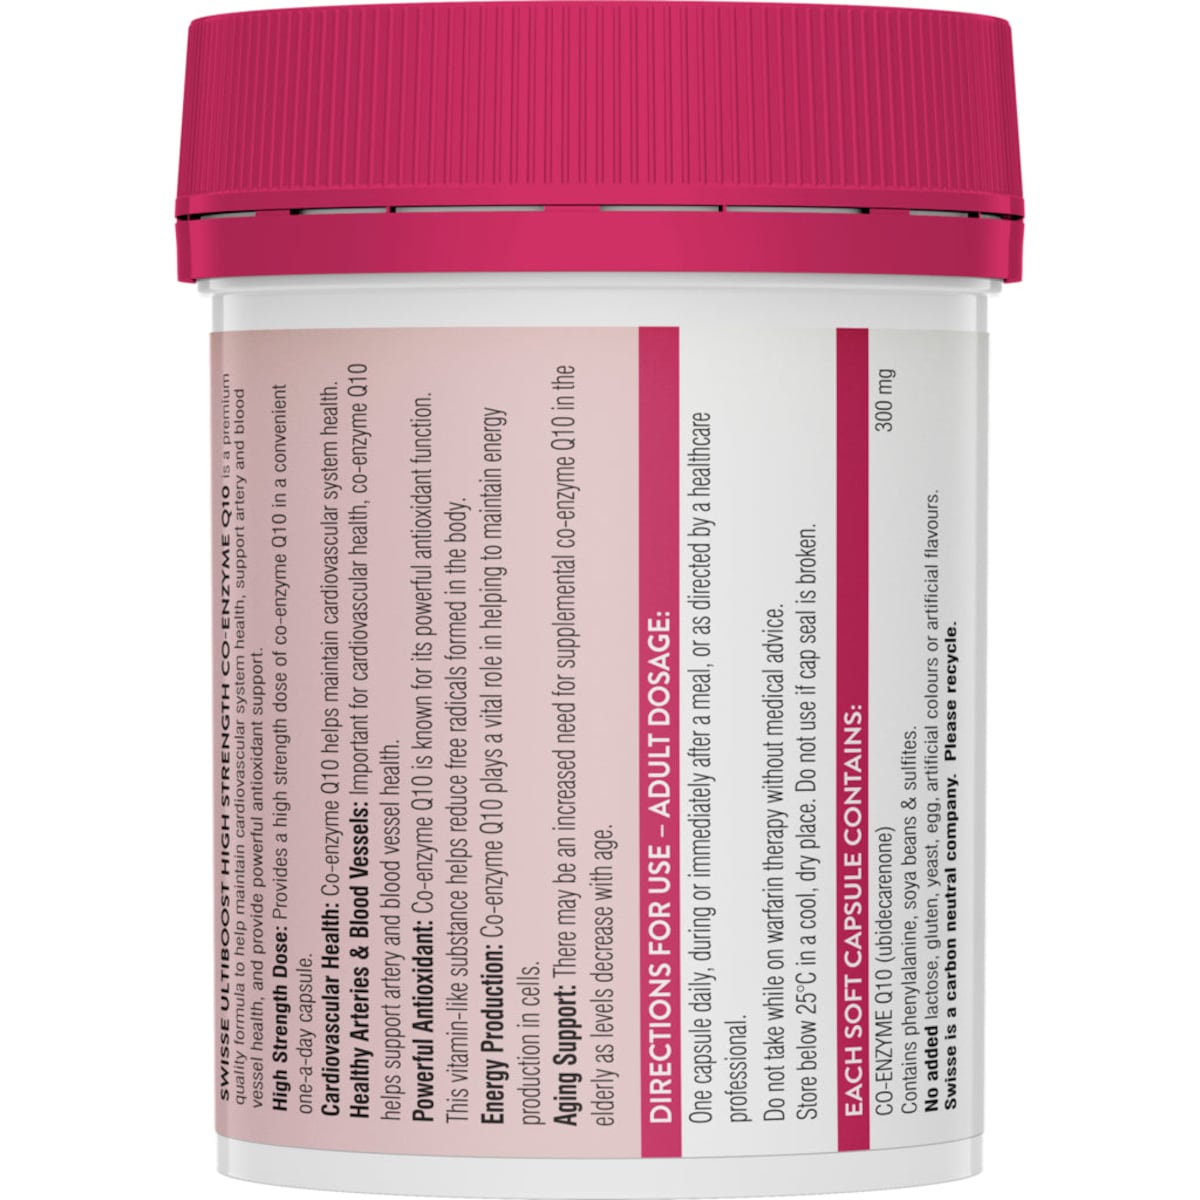 Swisse Ultiboost High Strength Co Enzyme Q10 90 Capsules